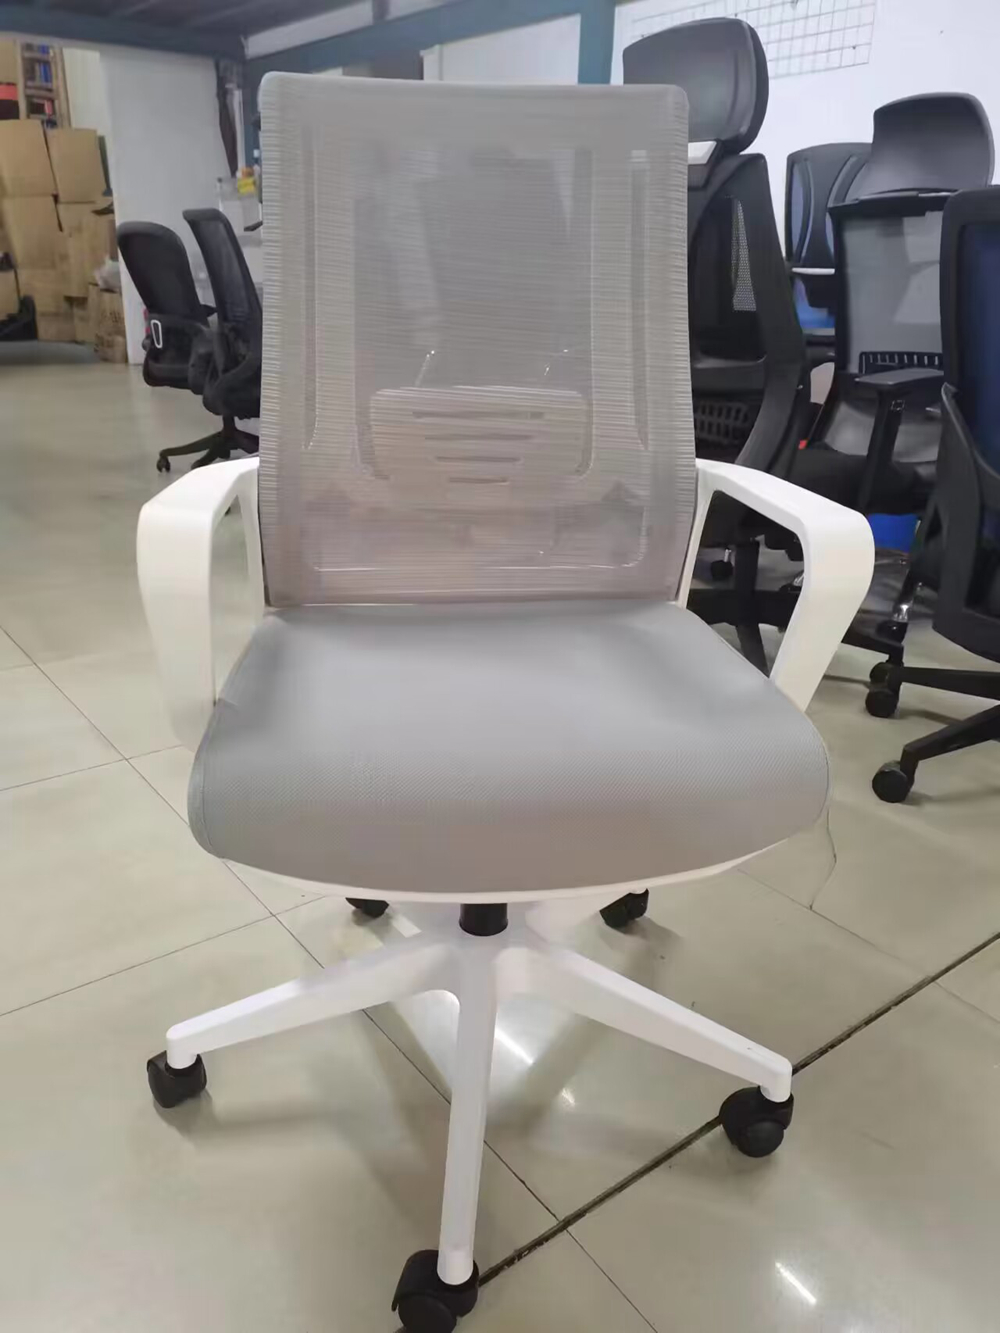 EKAR FURNITURE's Exclusive Fabric and Iron Office Chair - Light Luxury in Professional Settings